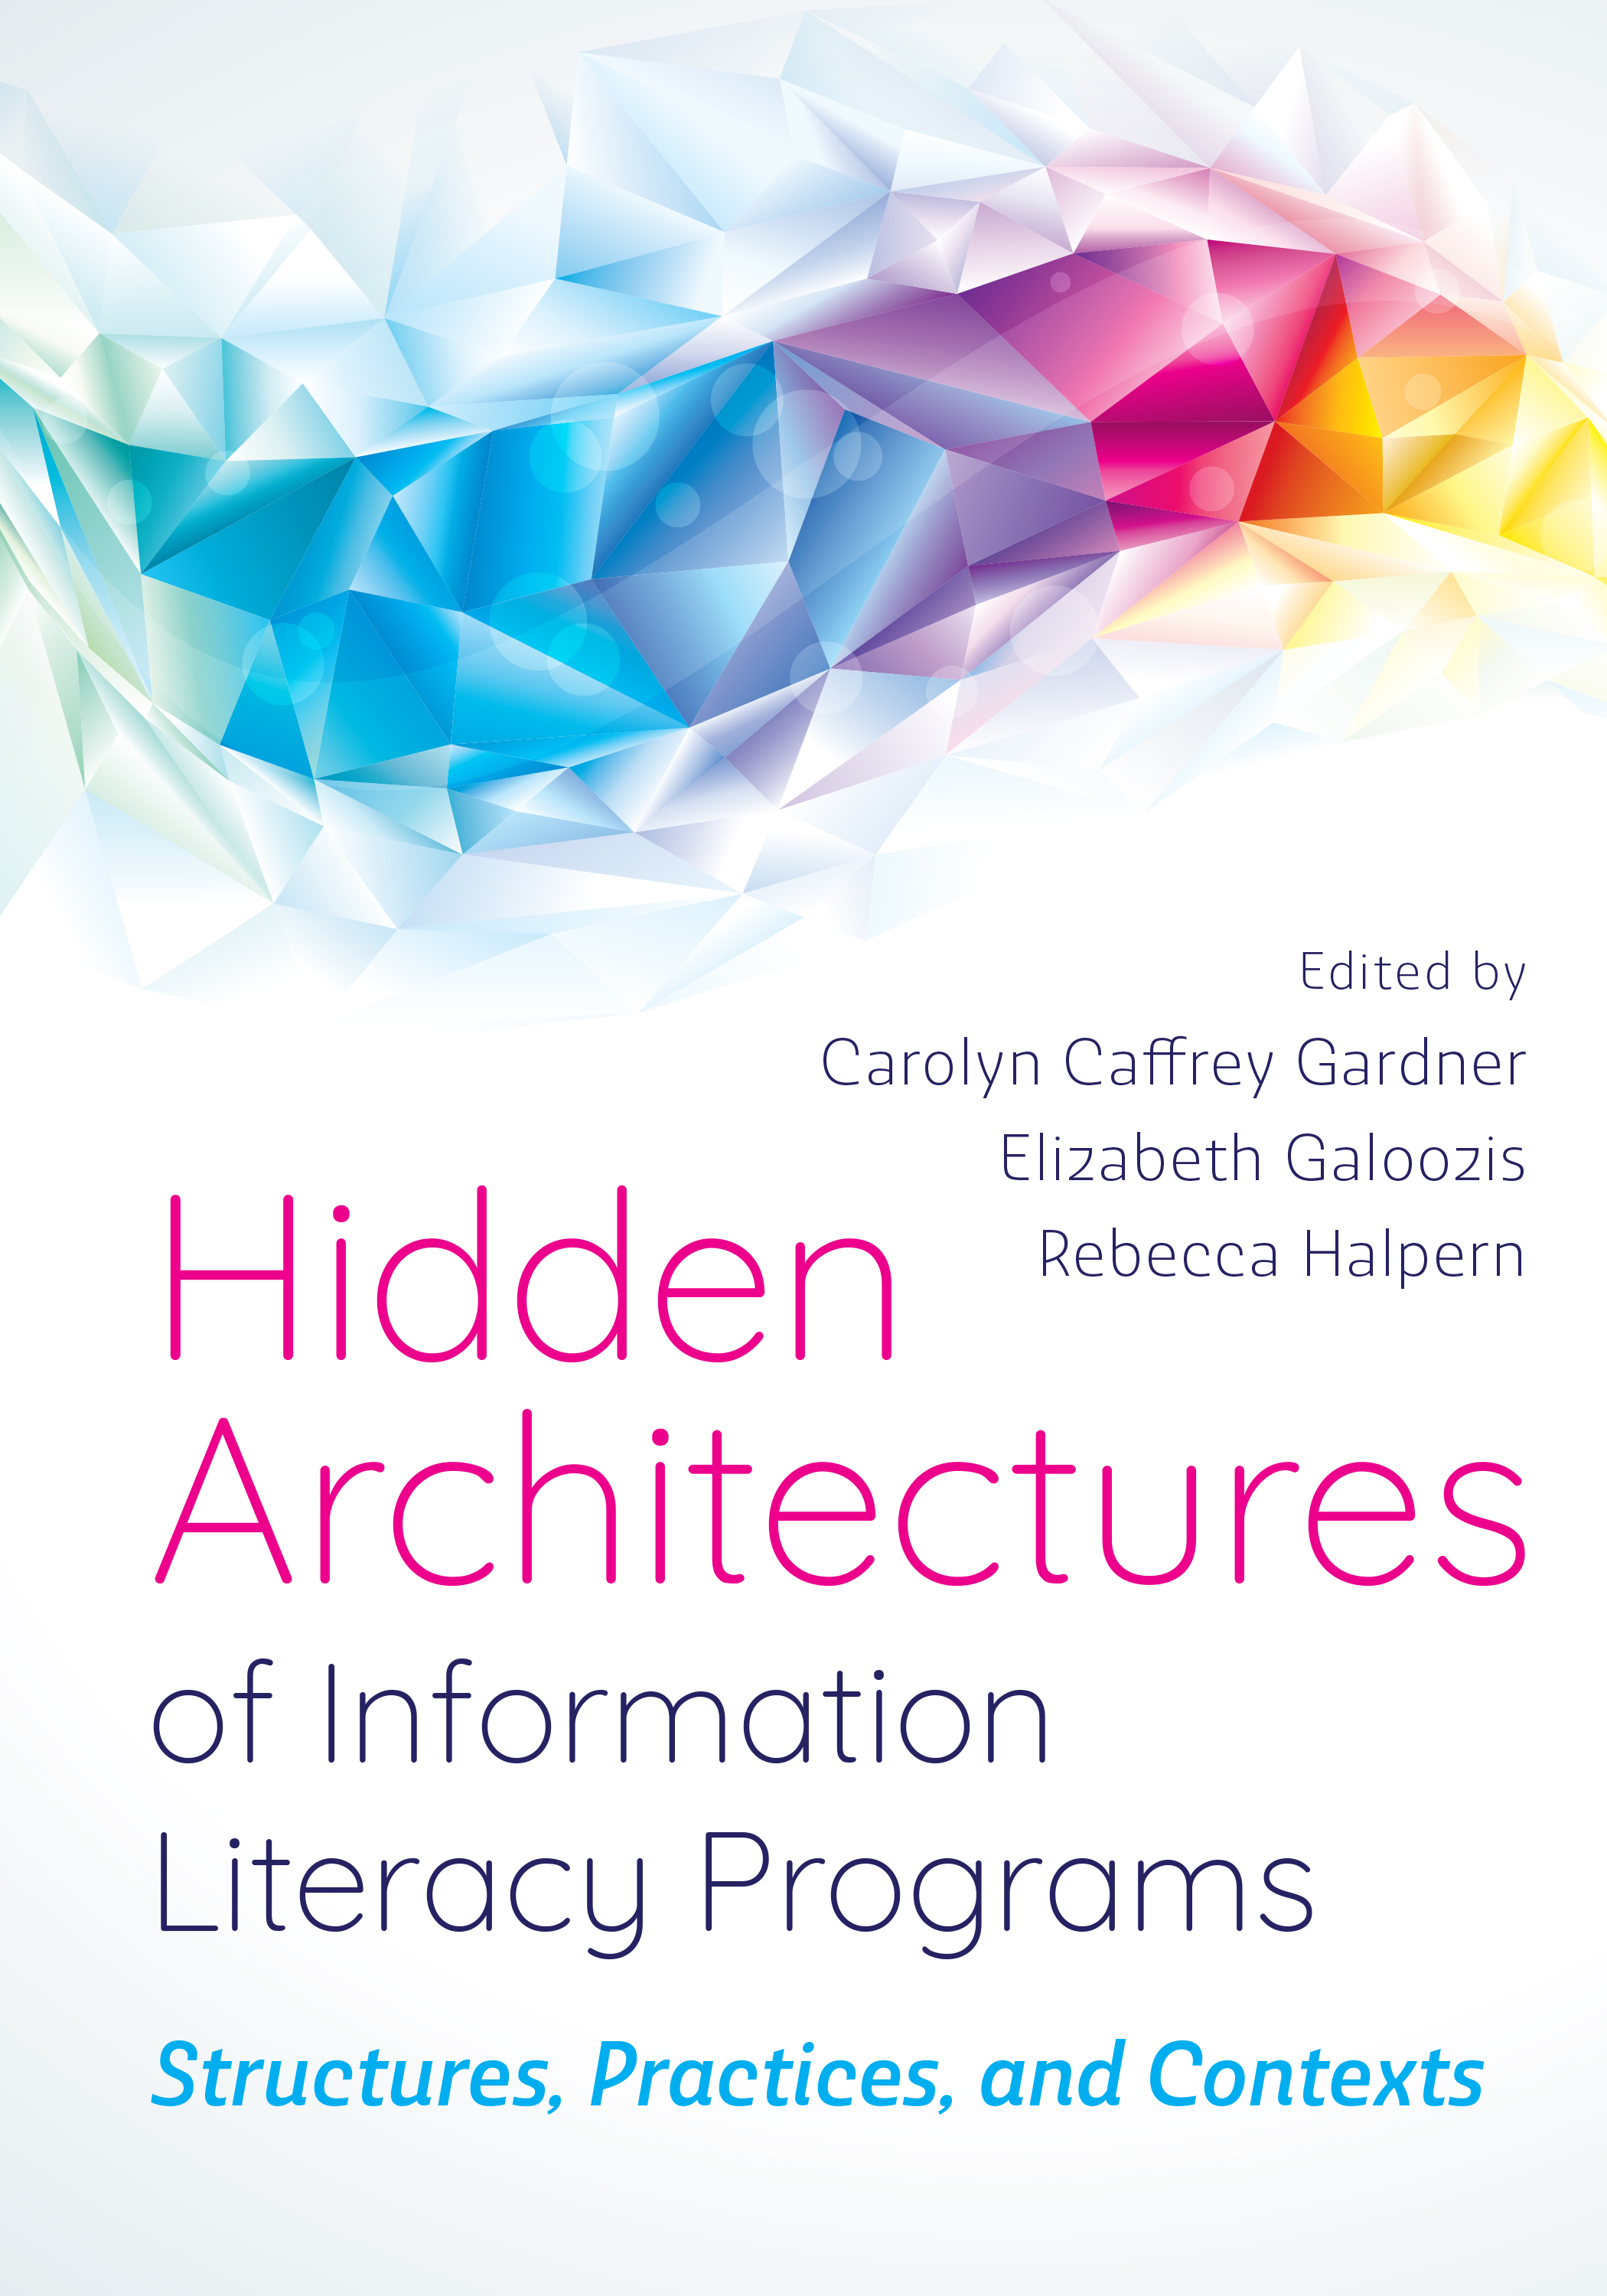 Hidden Architectures of Information Literacy Programs: Structures, Practices, and Contexts